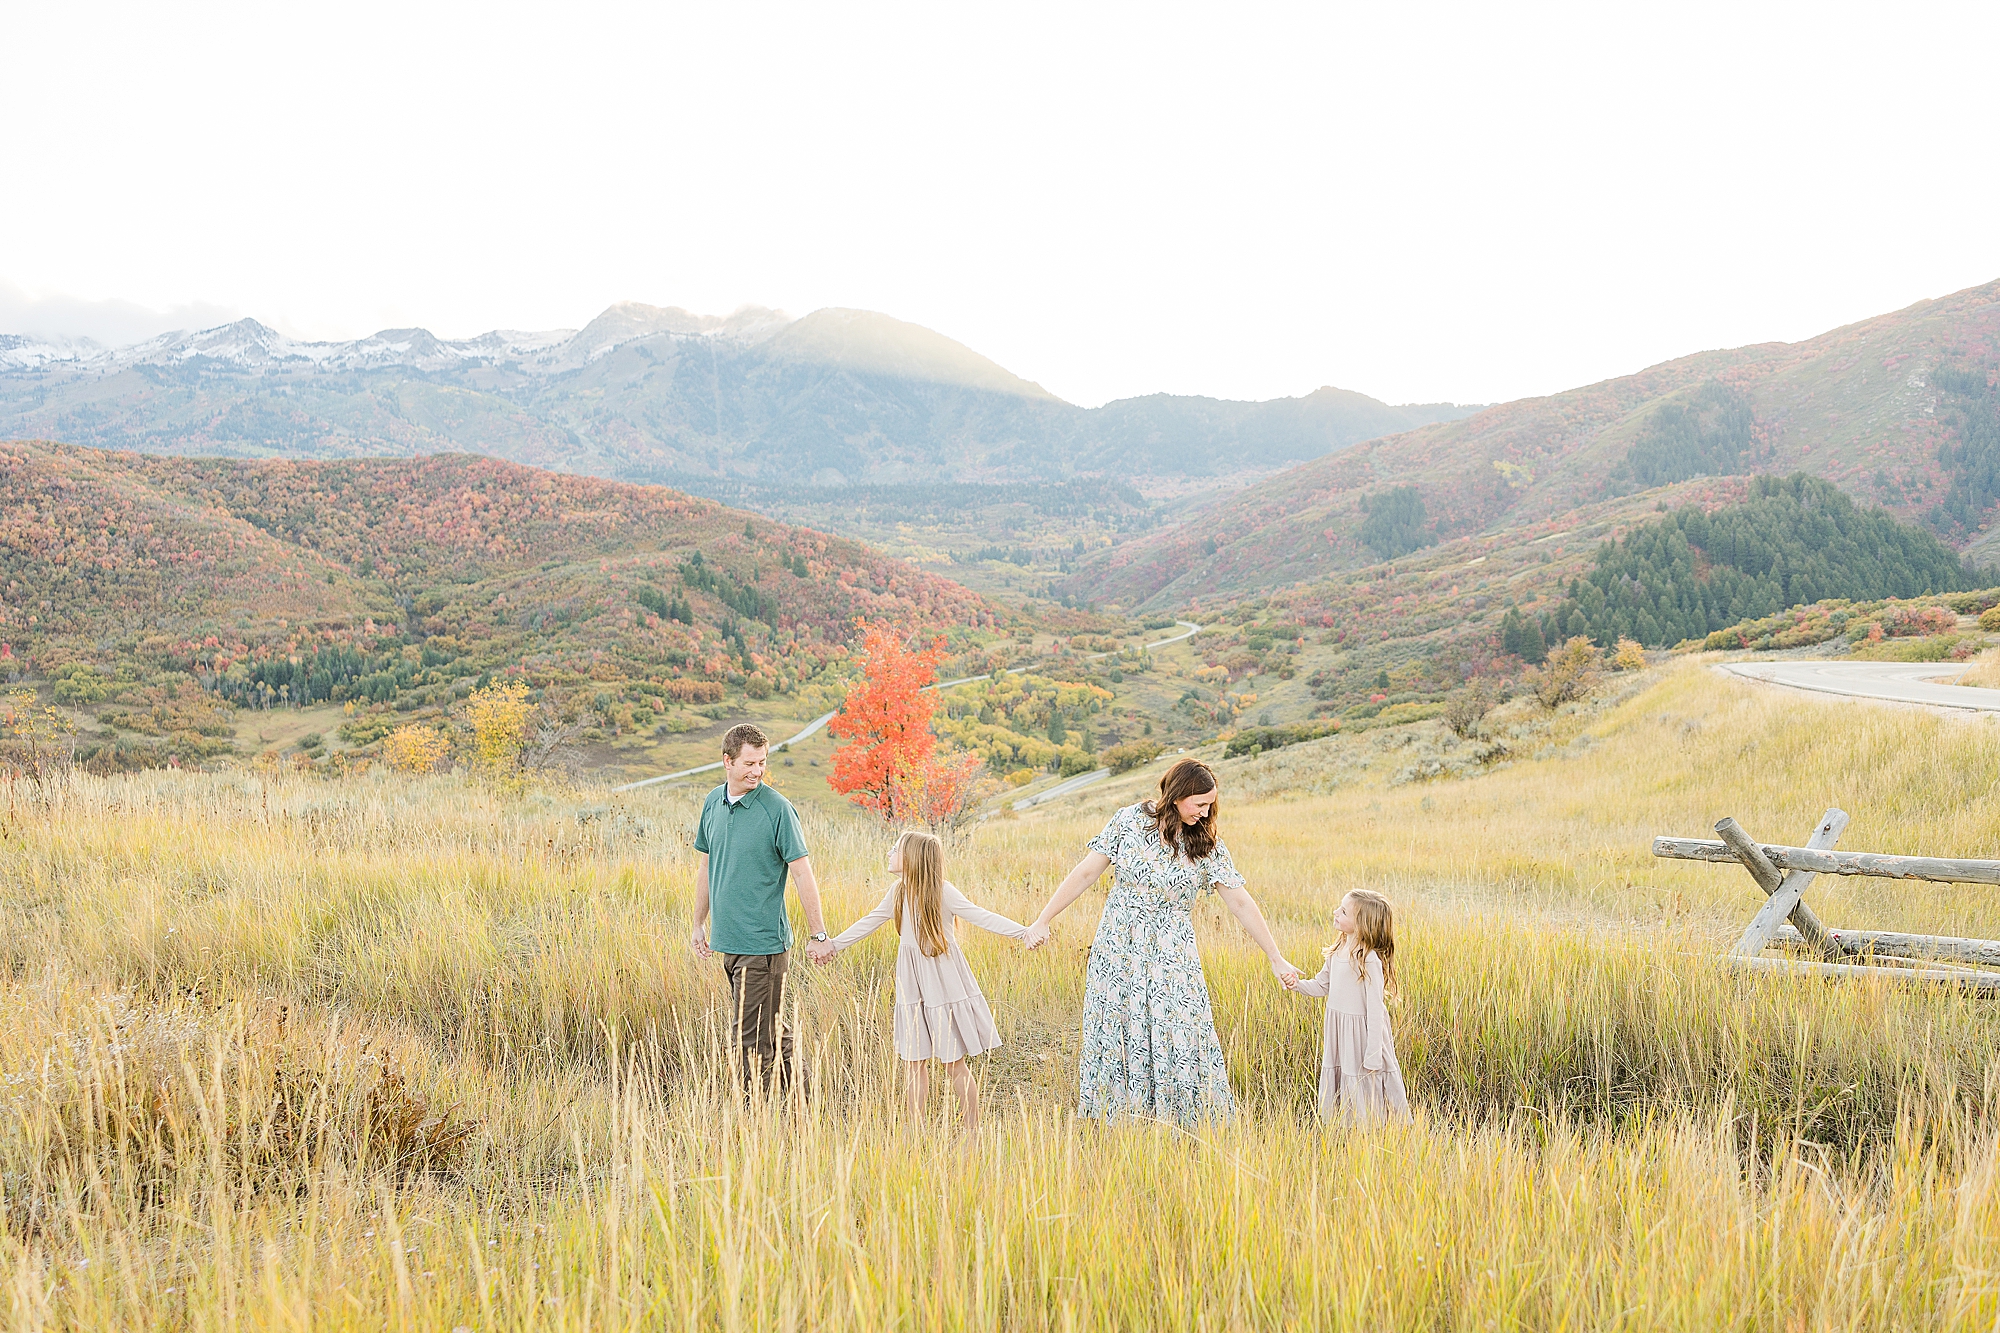 Timeless family moments set in the stunning fall landscape of Snow Basin.